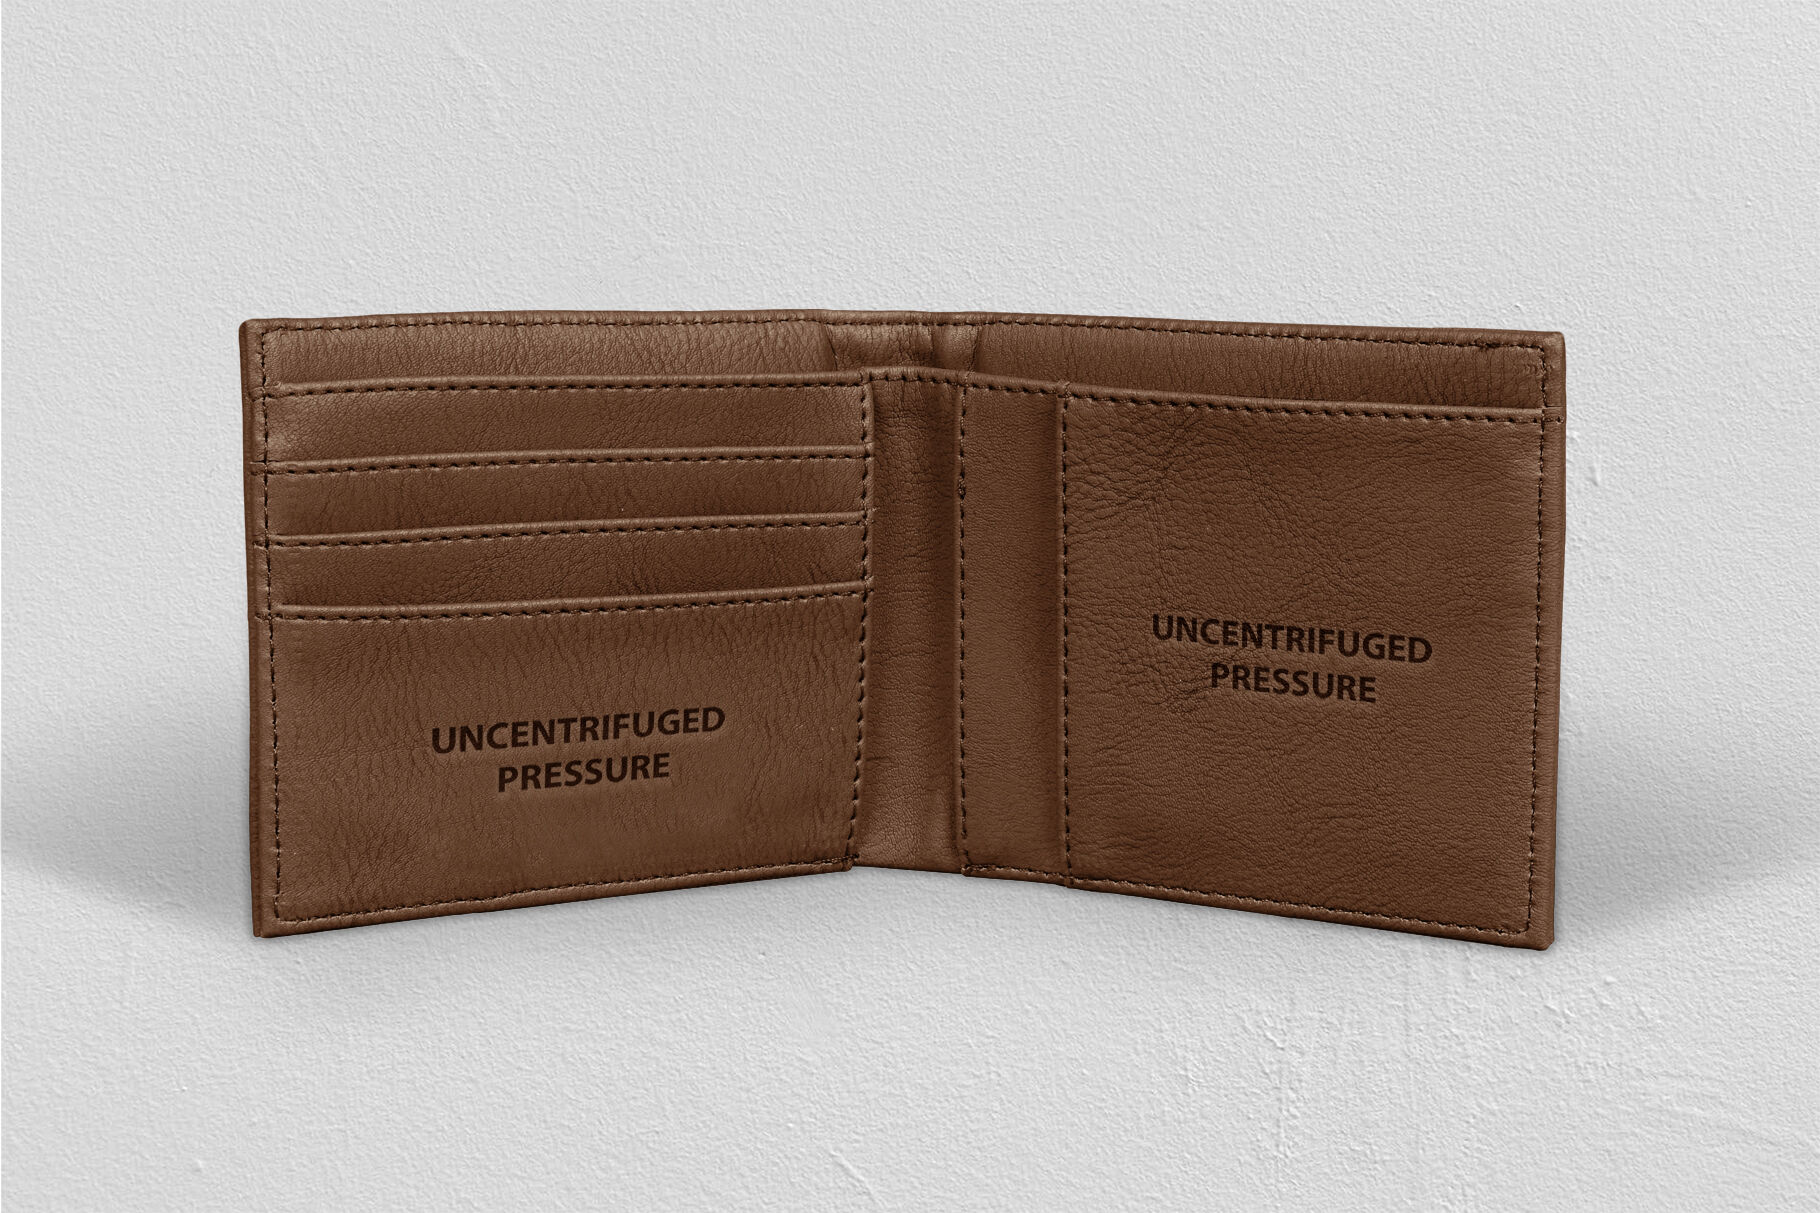 Download Leather Wallet Mockup By Uncentrifuged Pressure ...